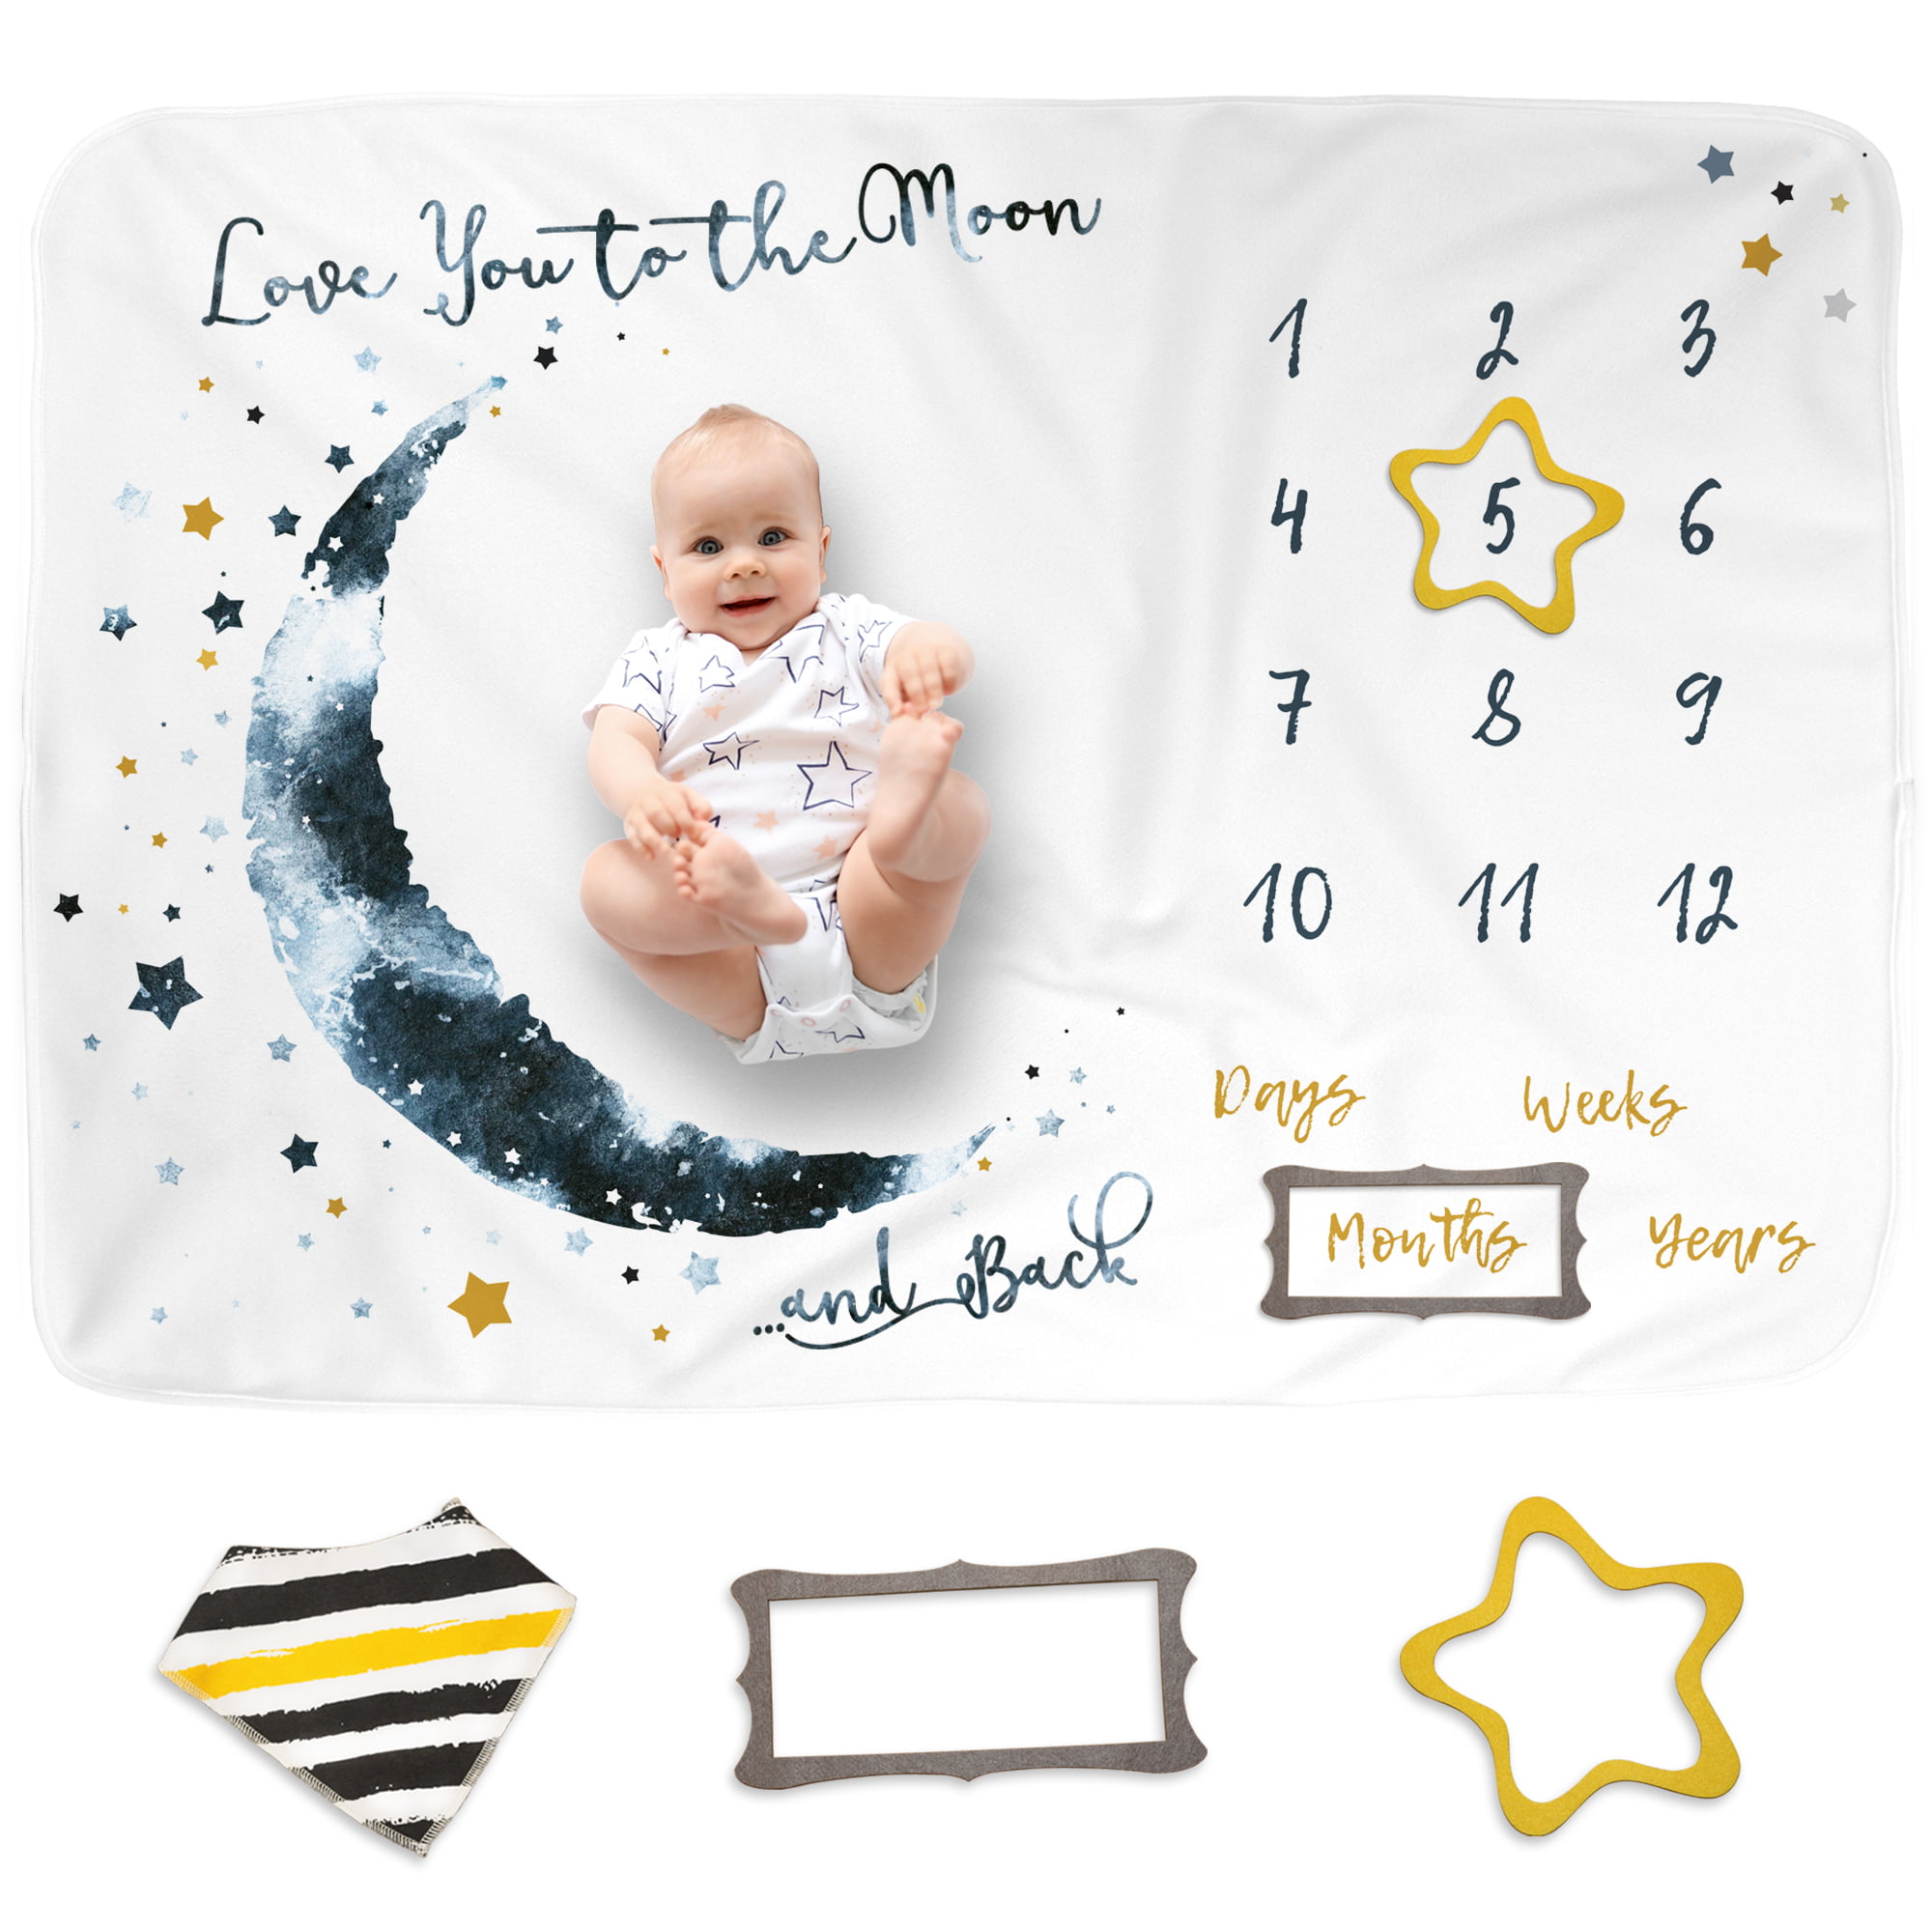 24 UNISEX MEMORABLE MOMENTS BABY'S FIRST YEAR MILESTONE CARDS BABY SHOWER GIFT 